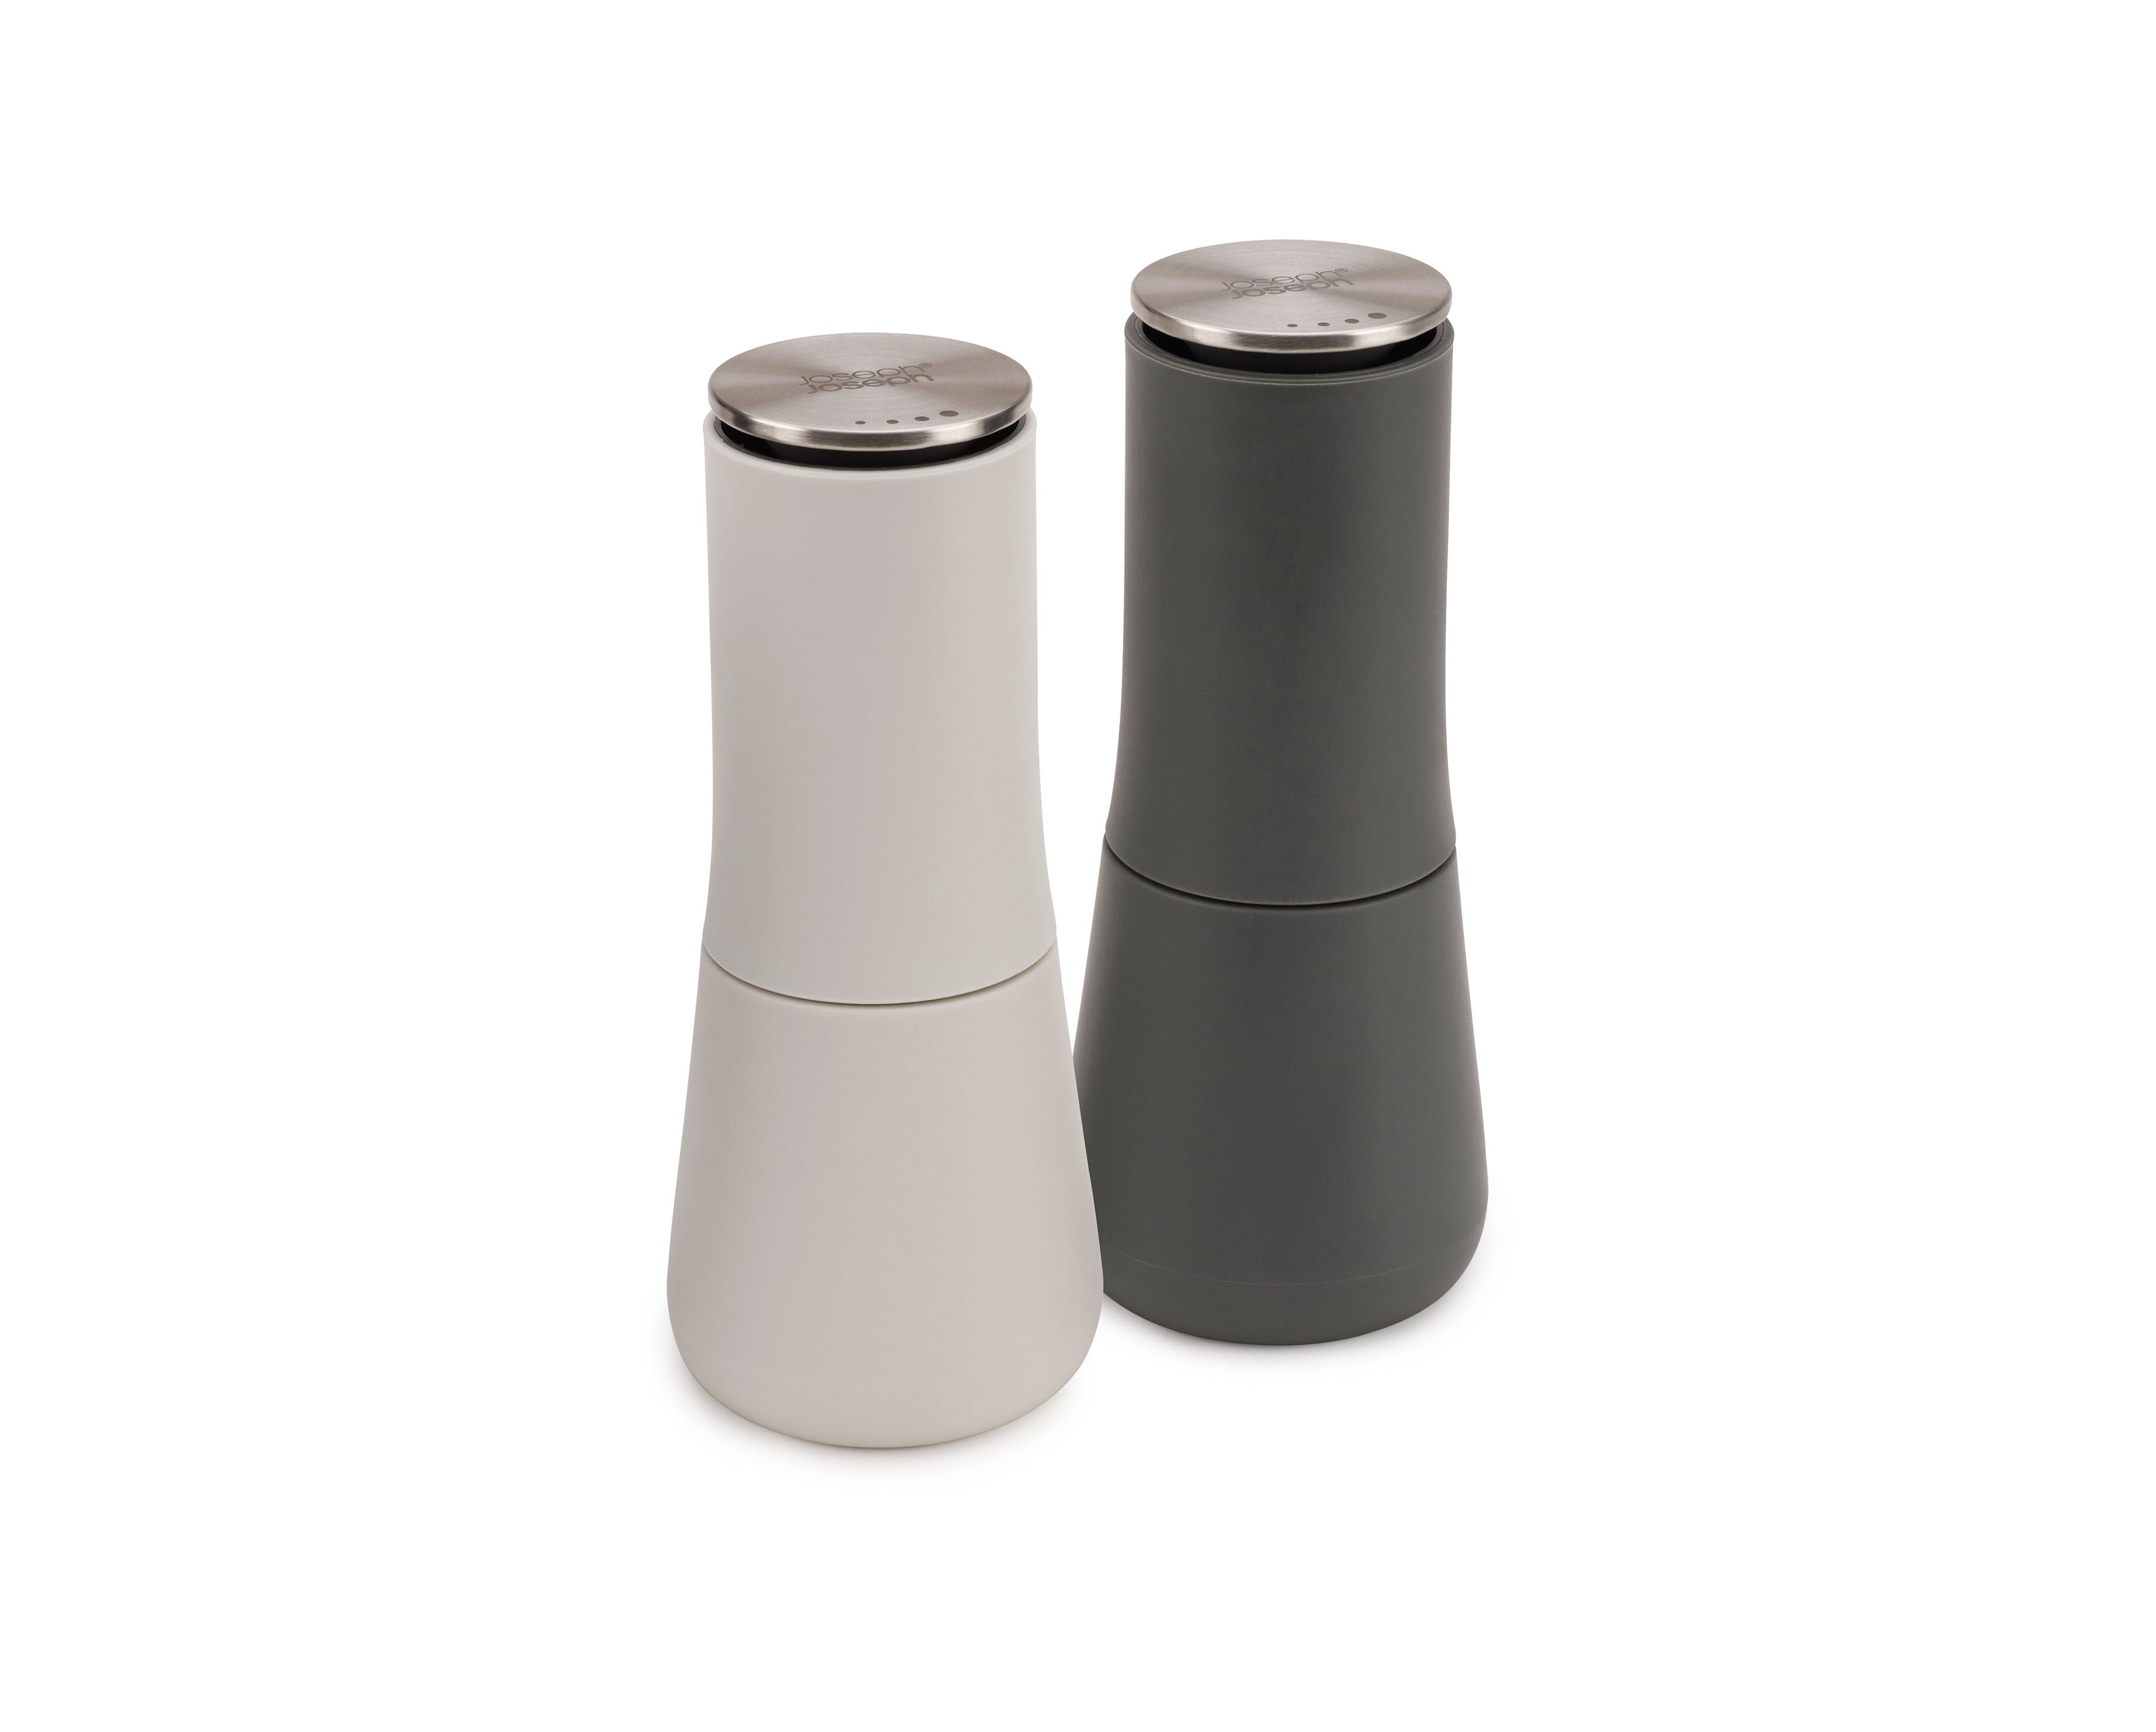 BEON.COM.AU  The clever design of these elegant salt and pepper mills means the grinding mechanism is at the top so any excess grounds fall back inside the unit rather than onto the surface they are set down on.  Inverted design keeps table tops mess-free Simply twist base to grind Adjust grinding size by tw... Joseph Joseph at BEON.COM.AU